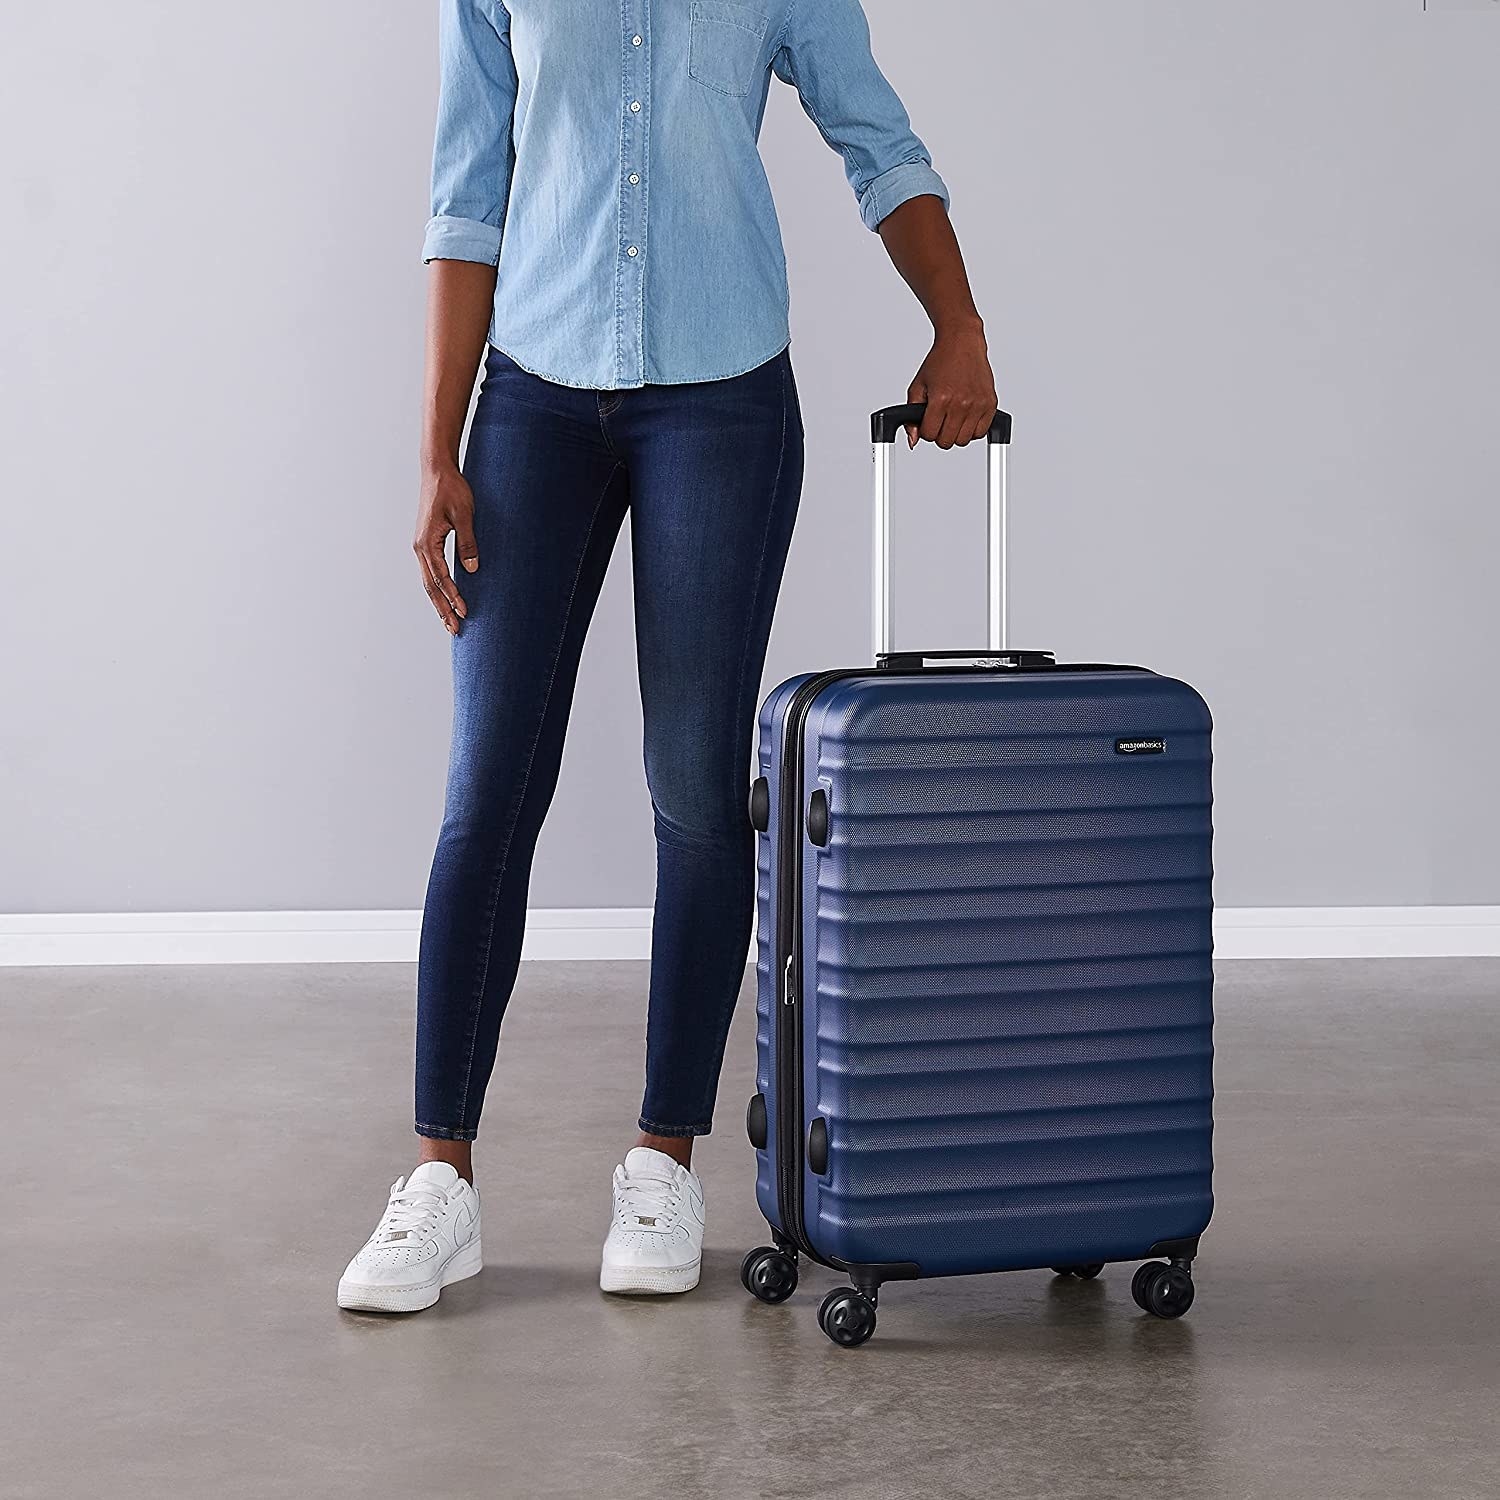 a person holding the handle of the hardshell luggage